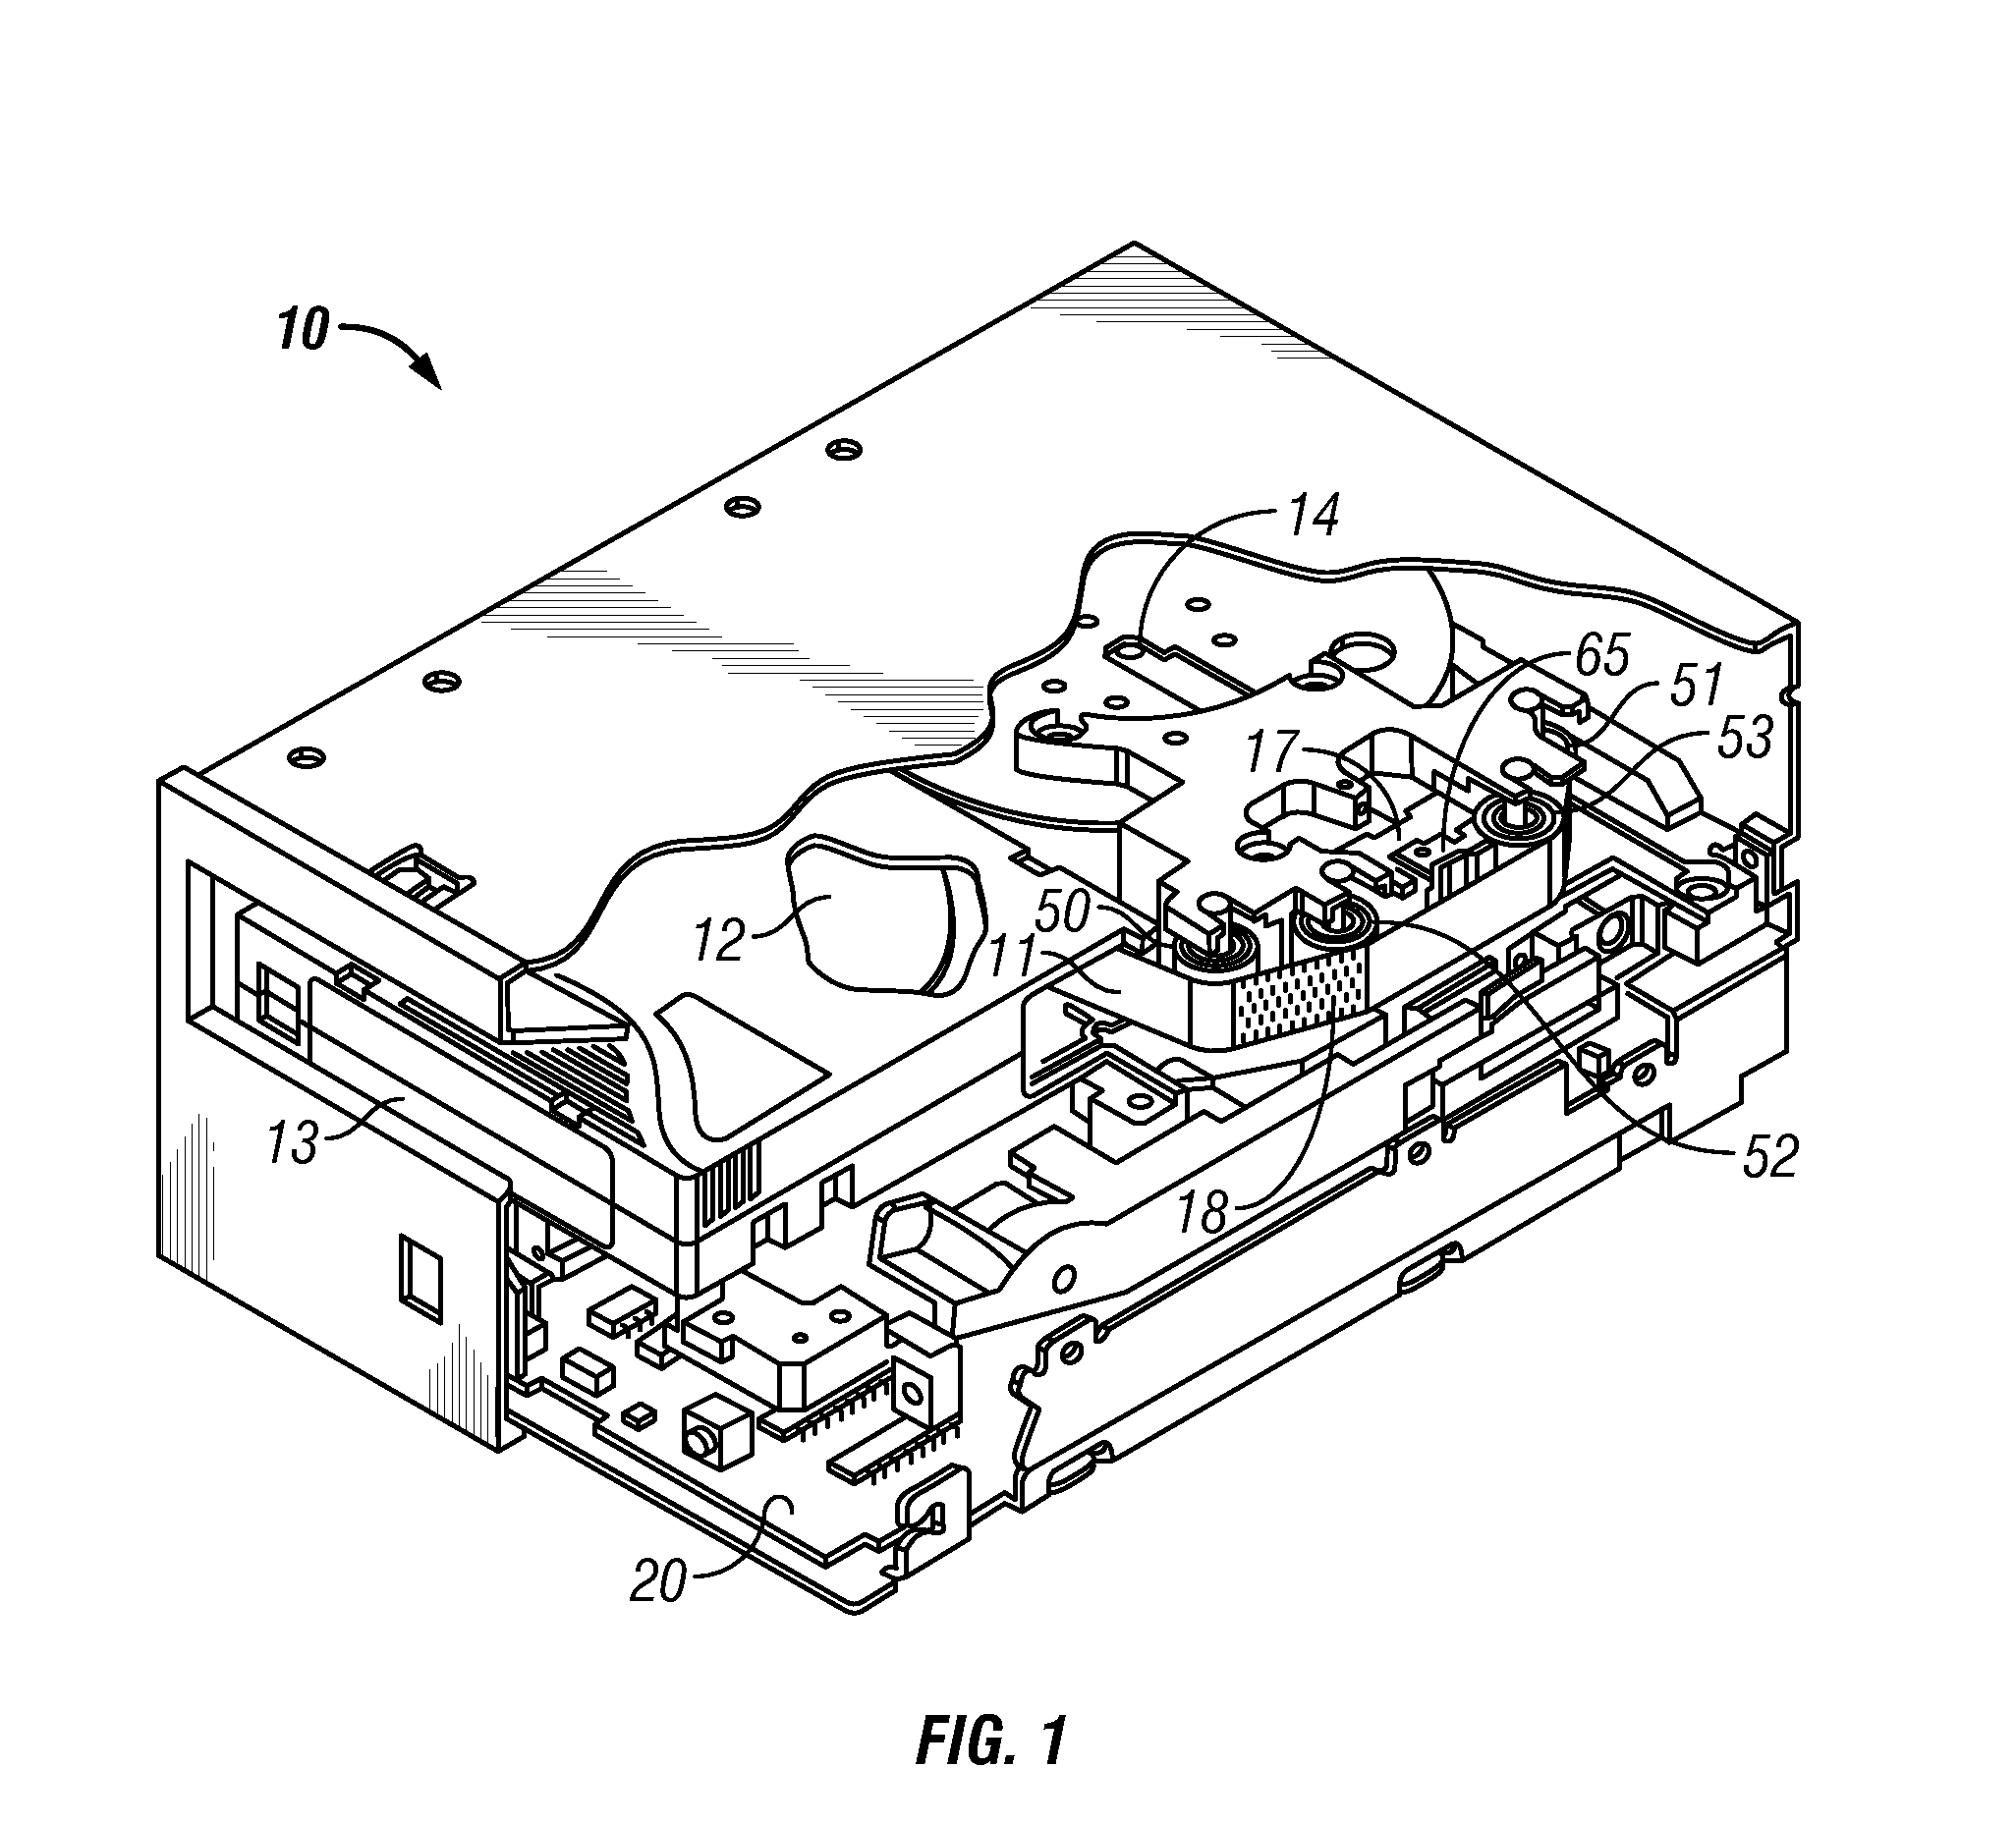 Positioning a coarse actuator of compound actuator tape servo system at midpoint of maximum peaks of lateral tape movement